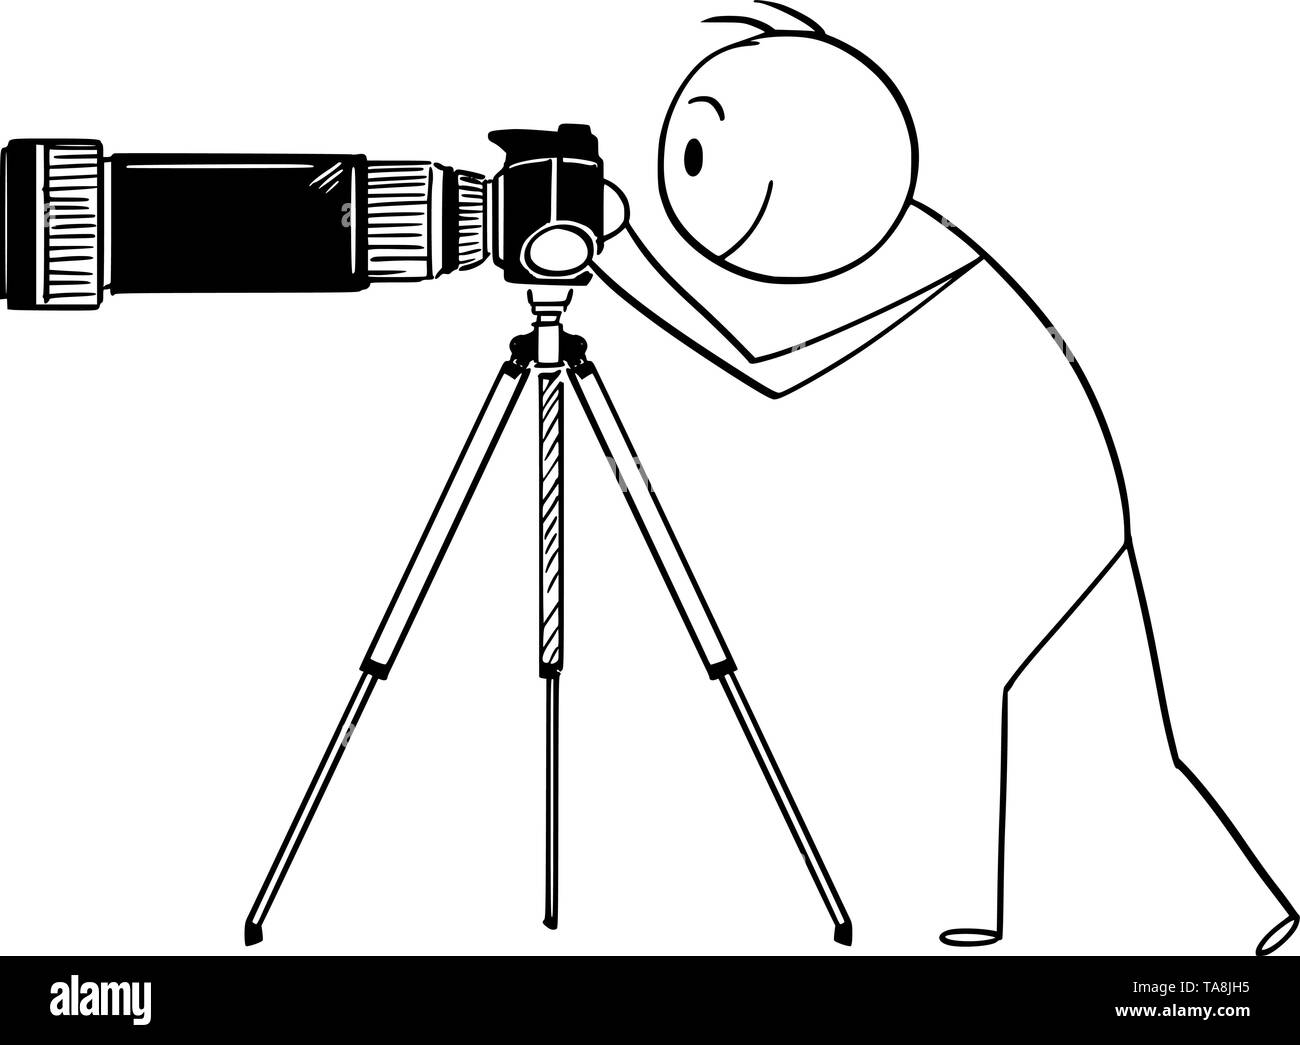 Vector cartoon stick figure drawing conceptual illustration of man or photographer taking photo with camera with big and long zoom or telephoto lens mounted on tripod. Stock Vector